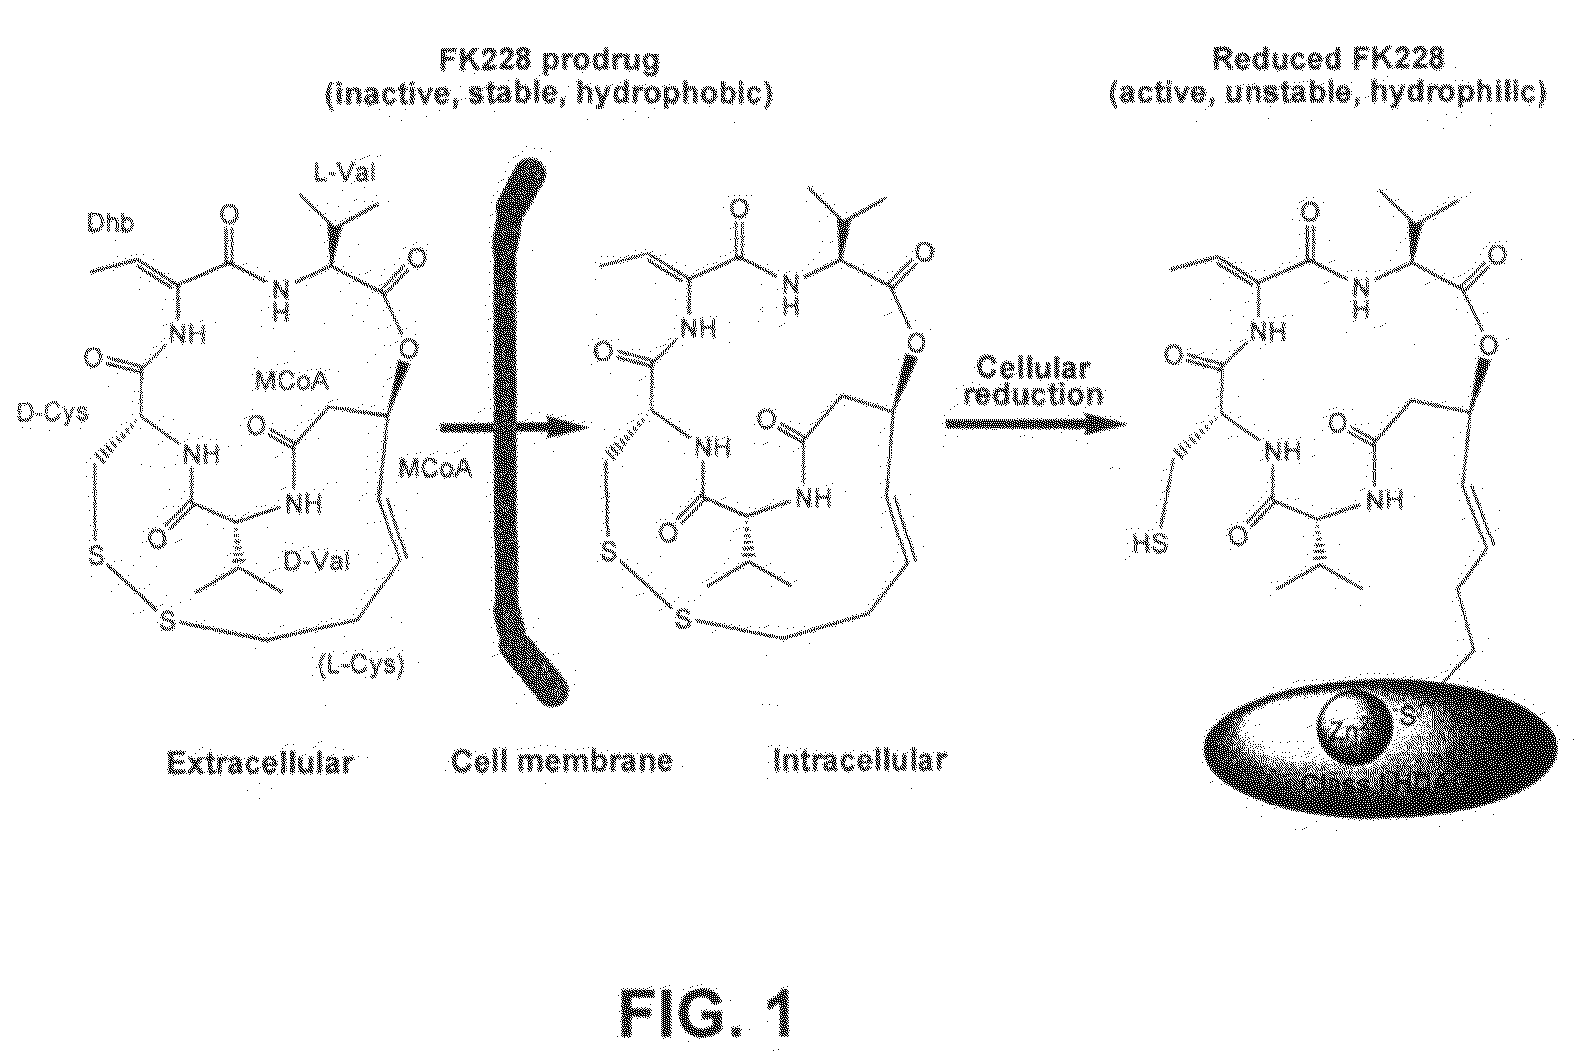 Sequences for fk228 biosynthesis and methods of synthesizing fk228 and fk228 analogs